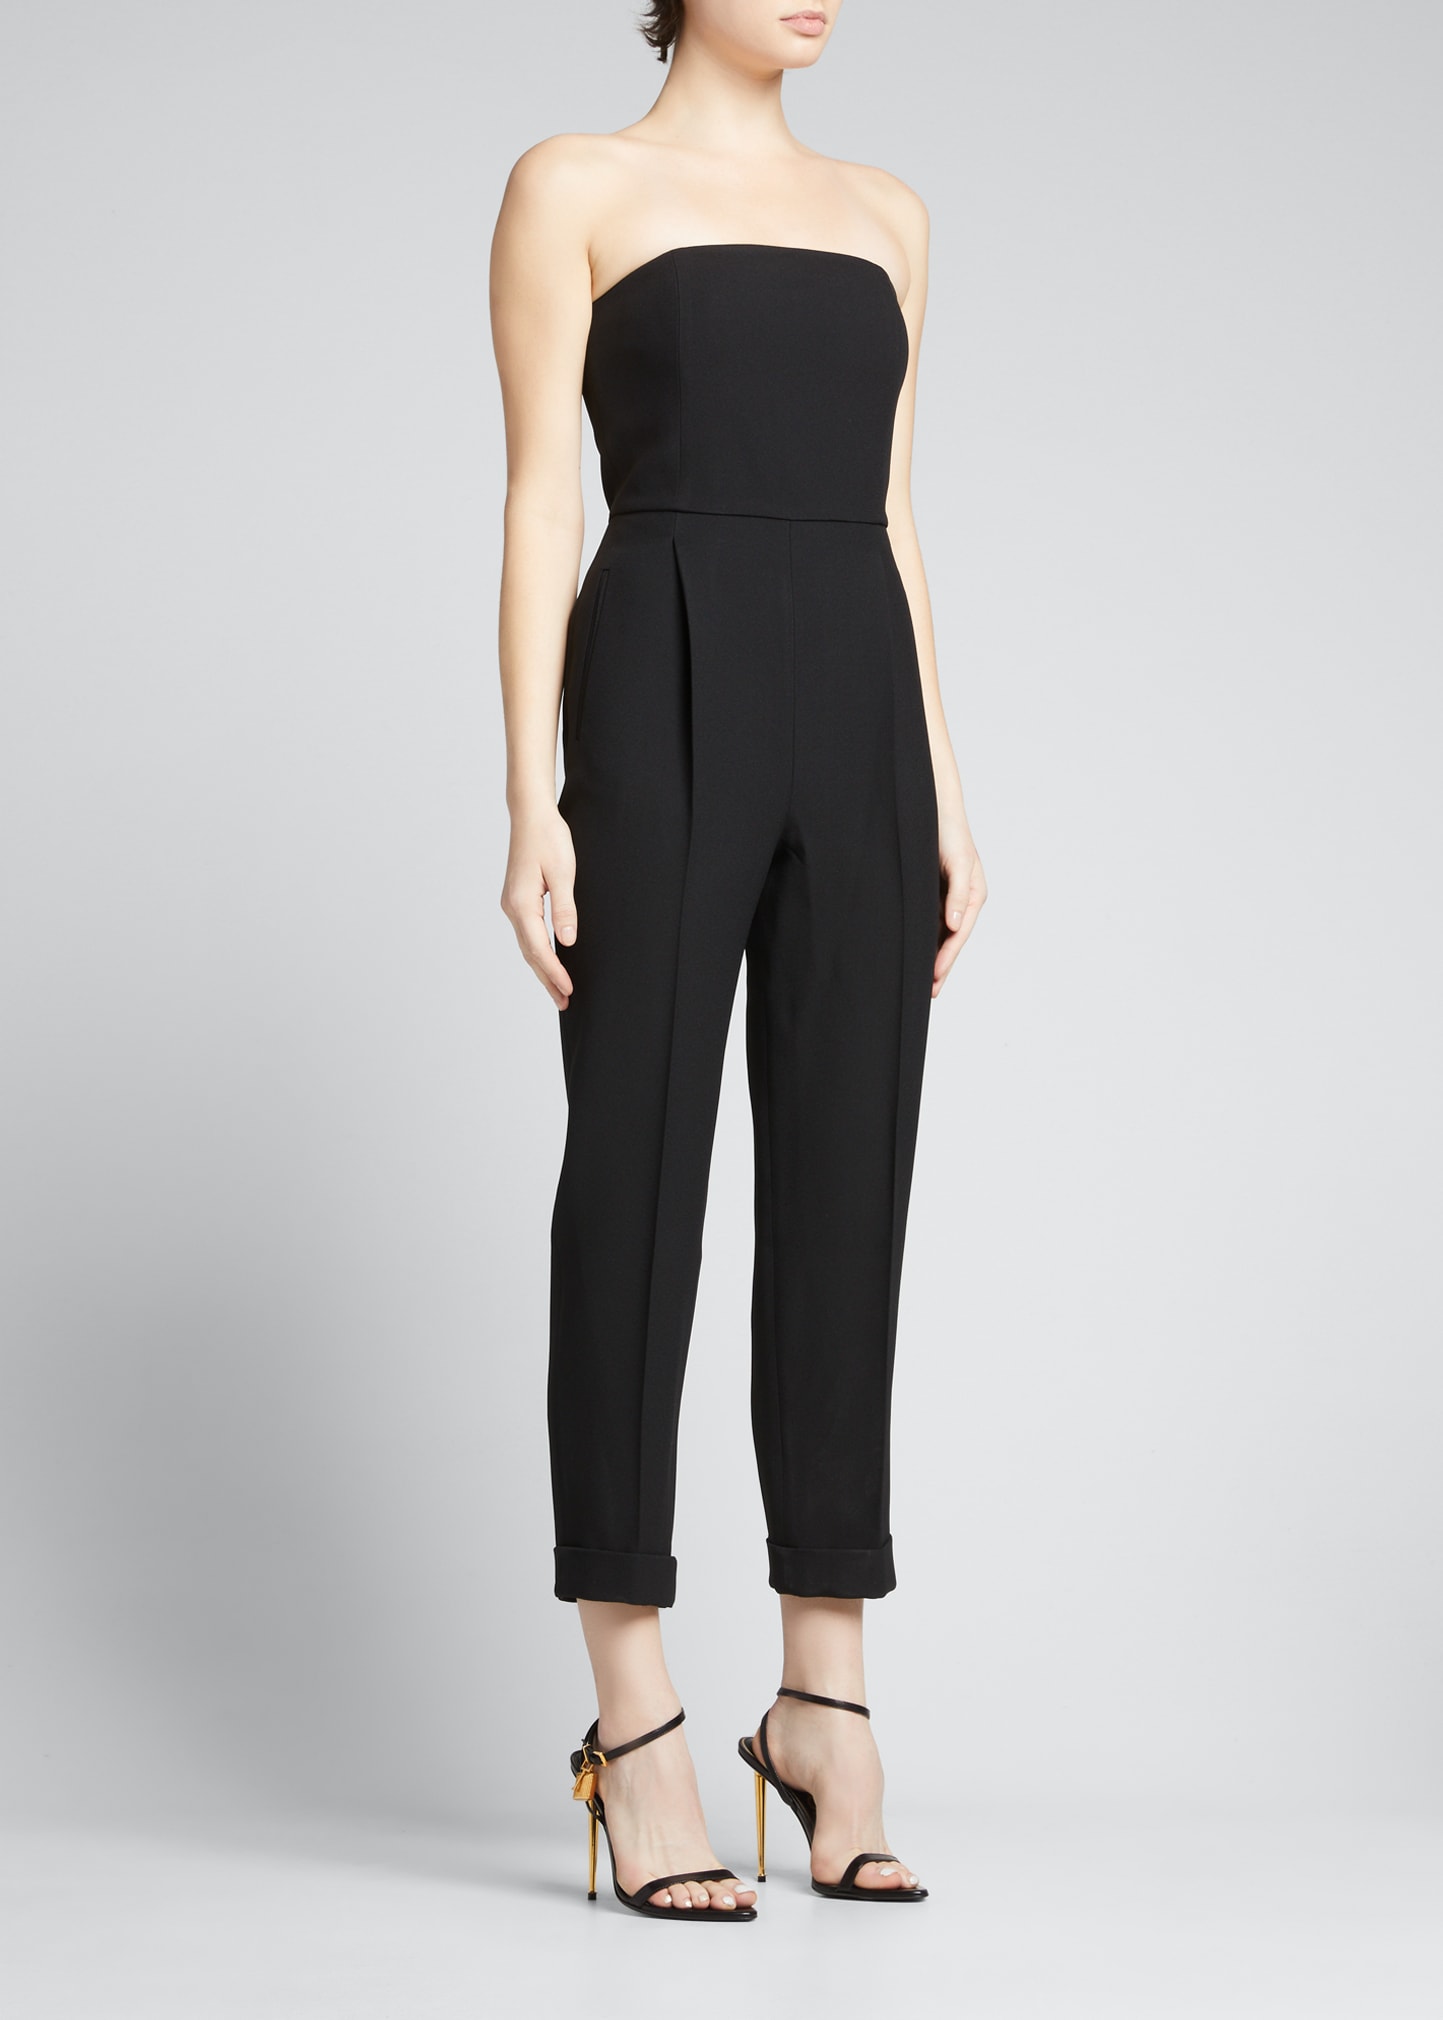 Michael Kors Collection Smocked Strapless Jumpsuit .ng